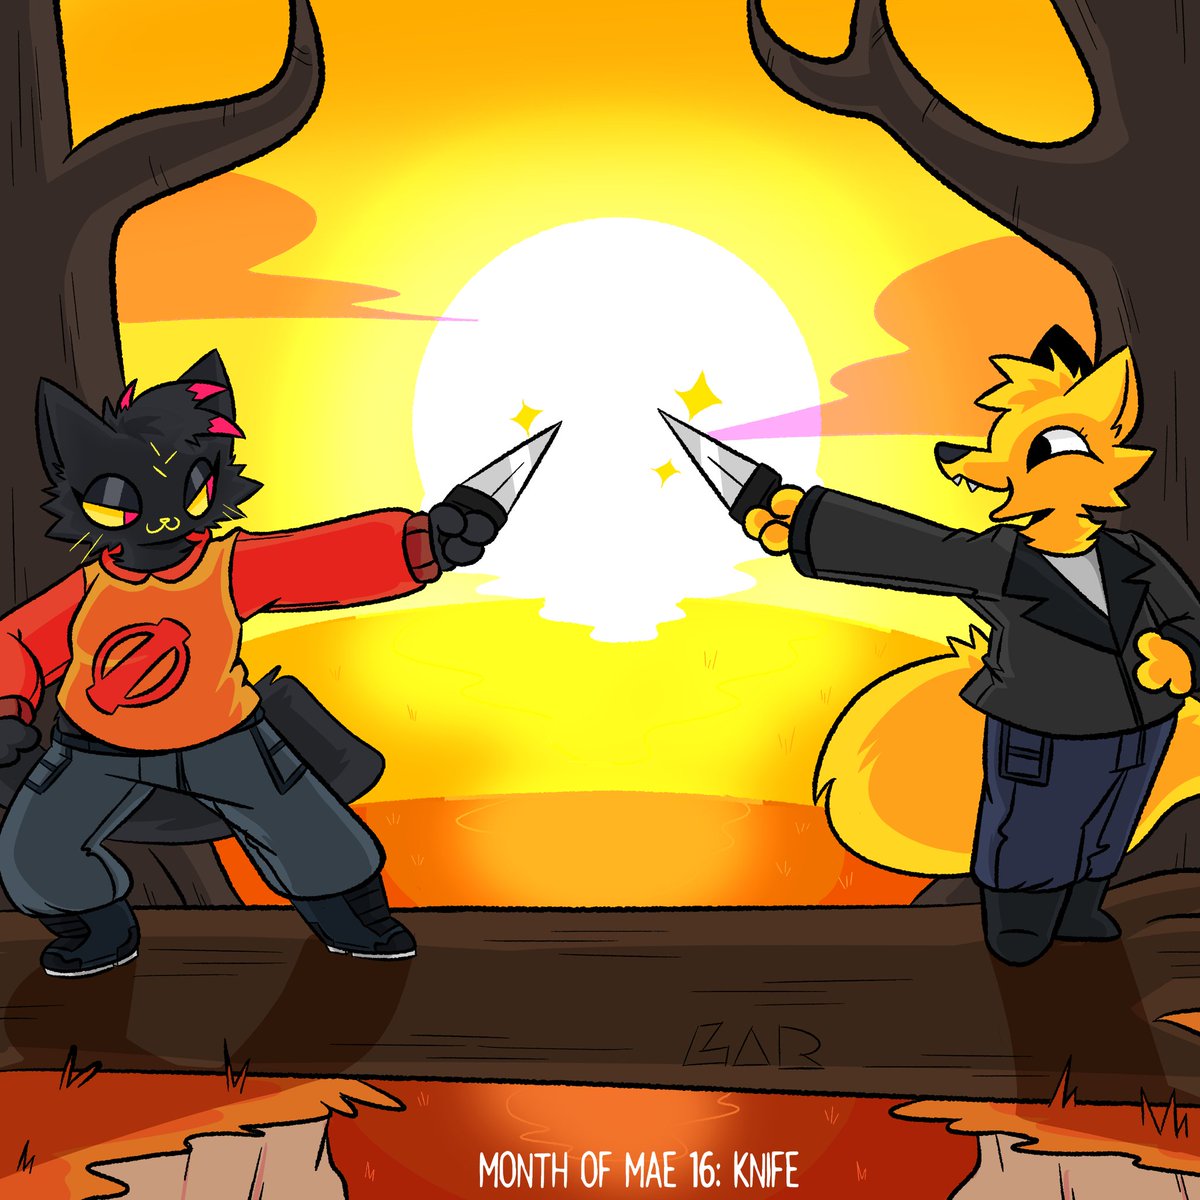 #MonthofMae2024 Day 16: A KNIFE! 🔪 
Powerful fencing! With pointy little fnifes.

#monthofmae #nitw #Nightinthewoods